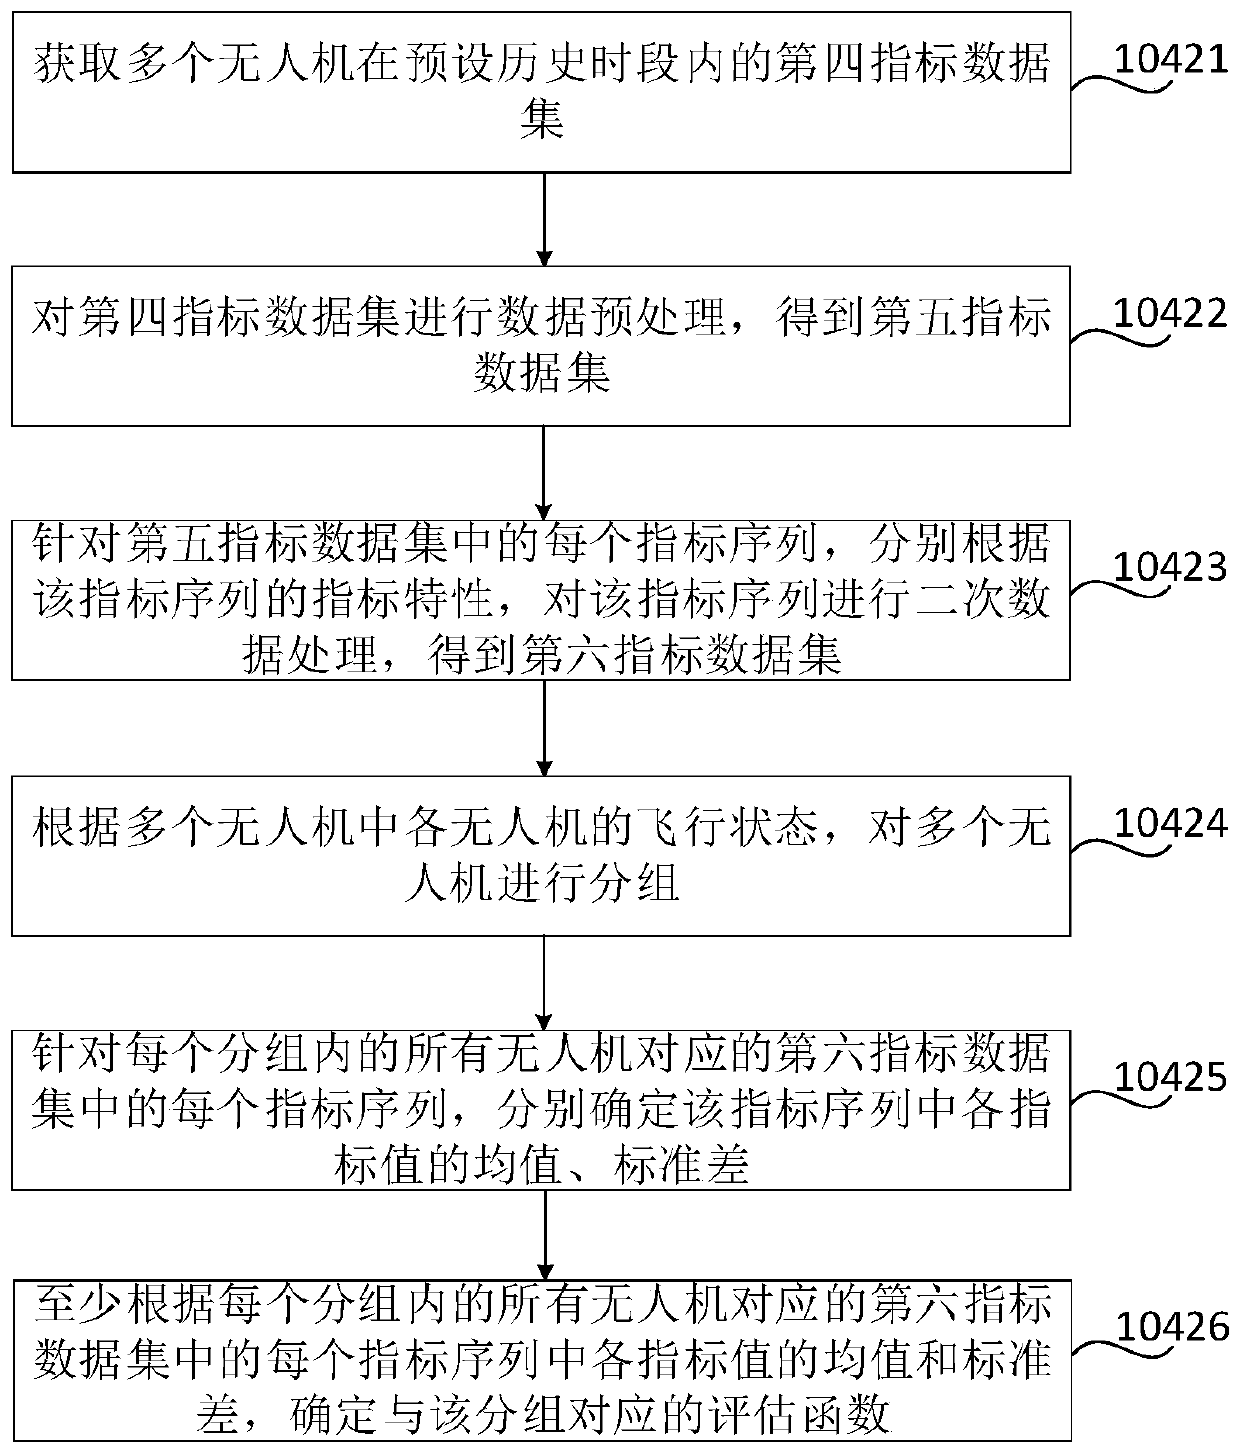 Unmanned aerial vehicle flight quality assessment method and device, storage medium and electronic equipment